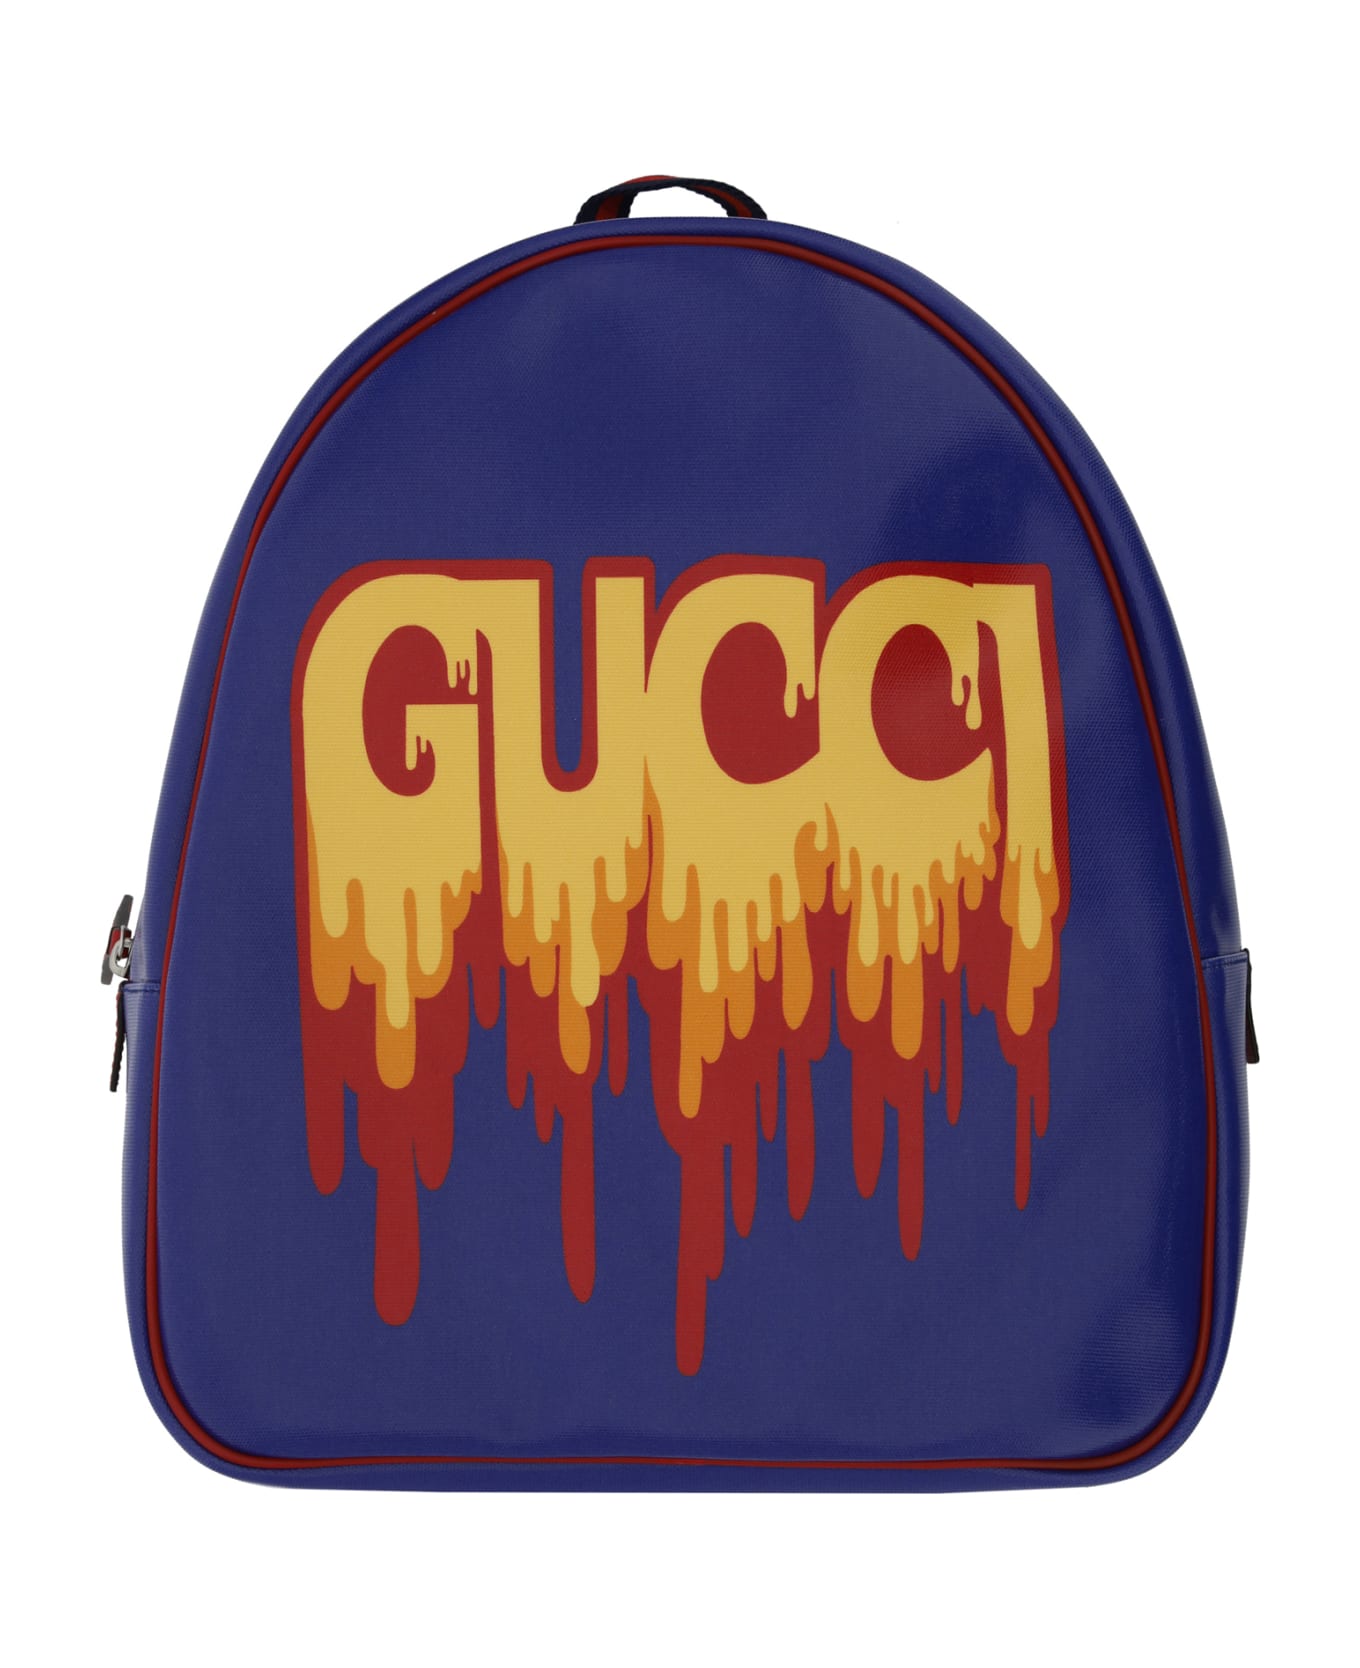 Gucci Malting Gucci Backpack For Girl - Multi